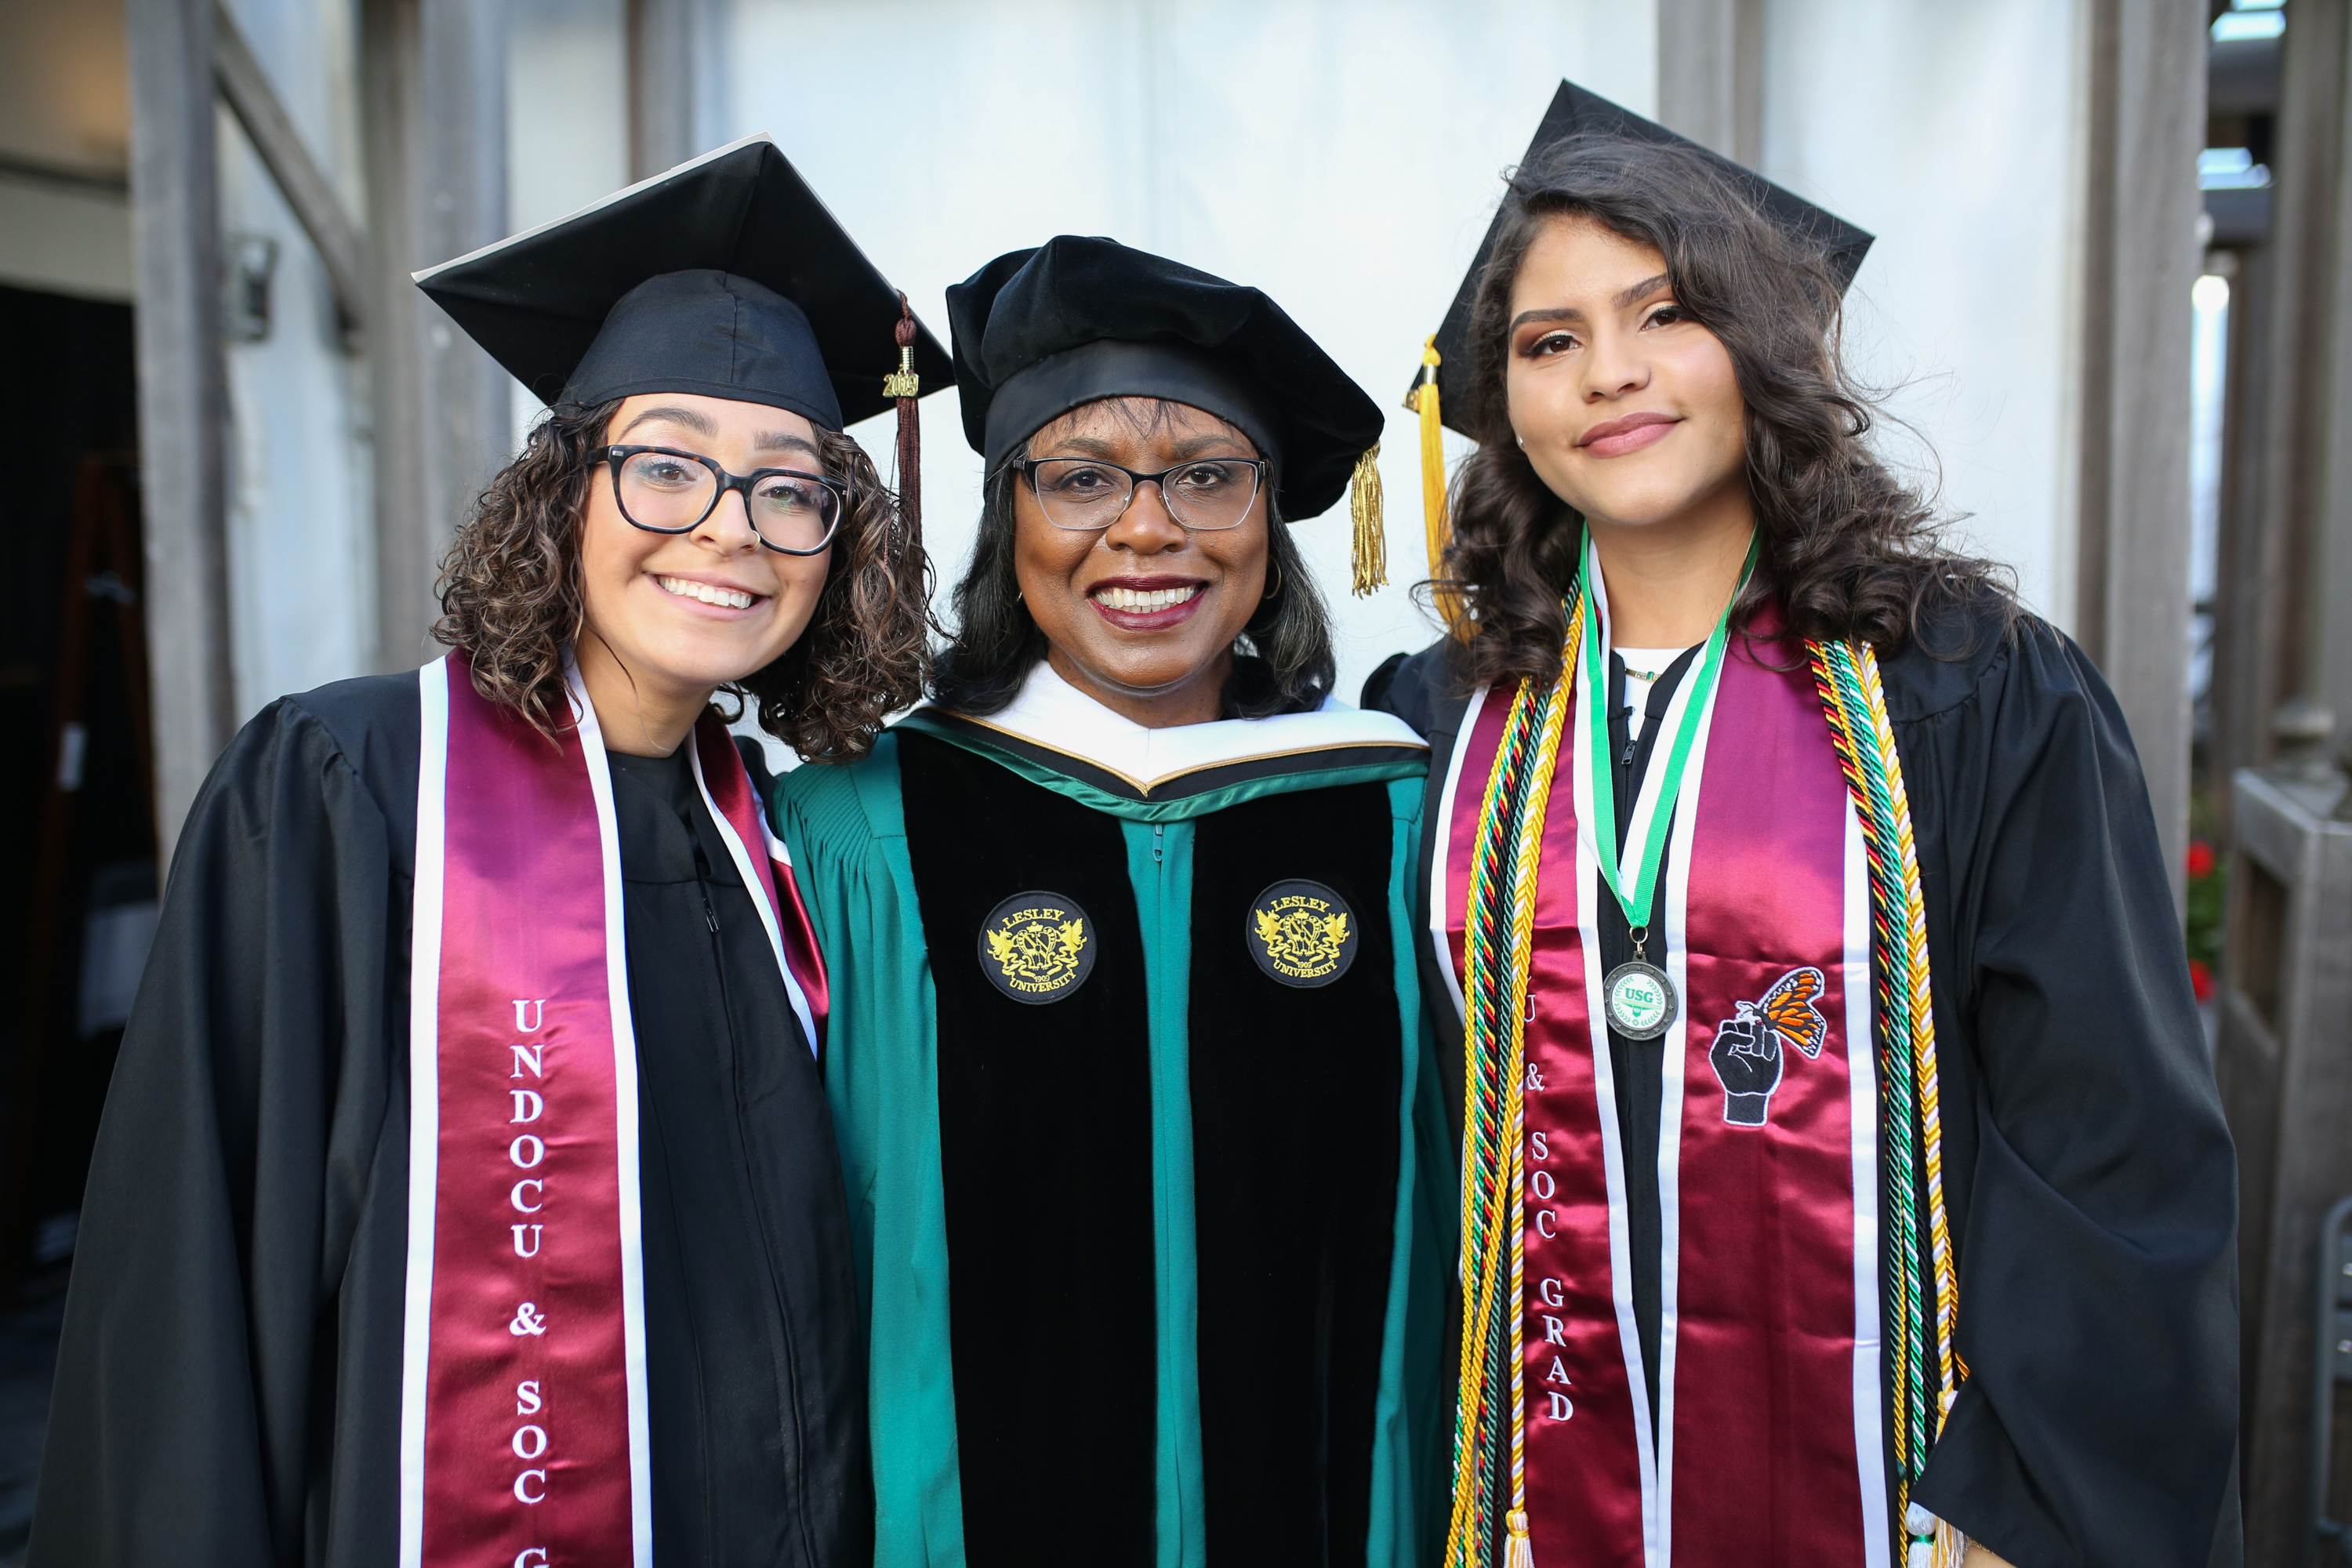 Vita Franjul (right) at Lesley's 2019 Commencement with College of Art and Design student speaker Tianna Rivera and Commencement speaker Anita Hill.